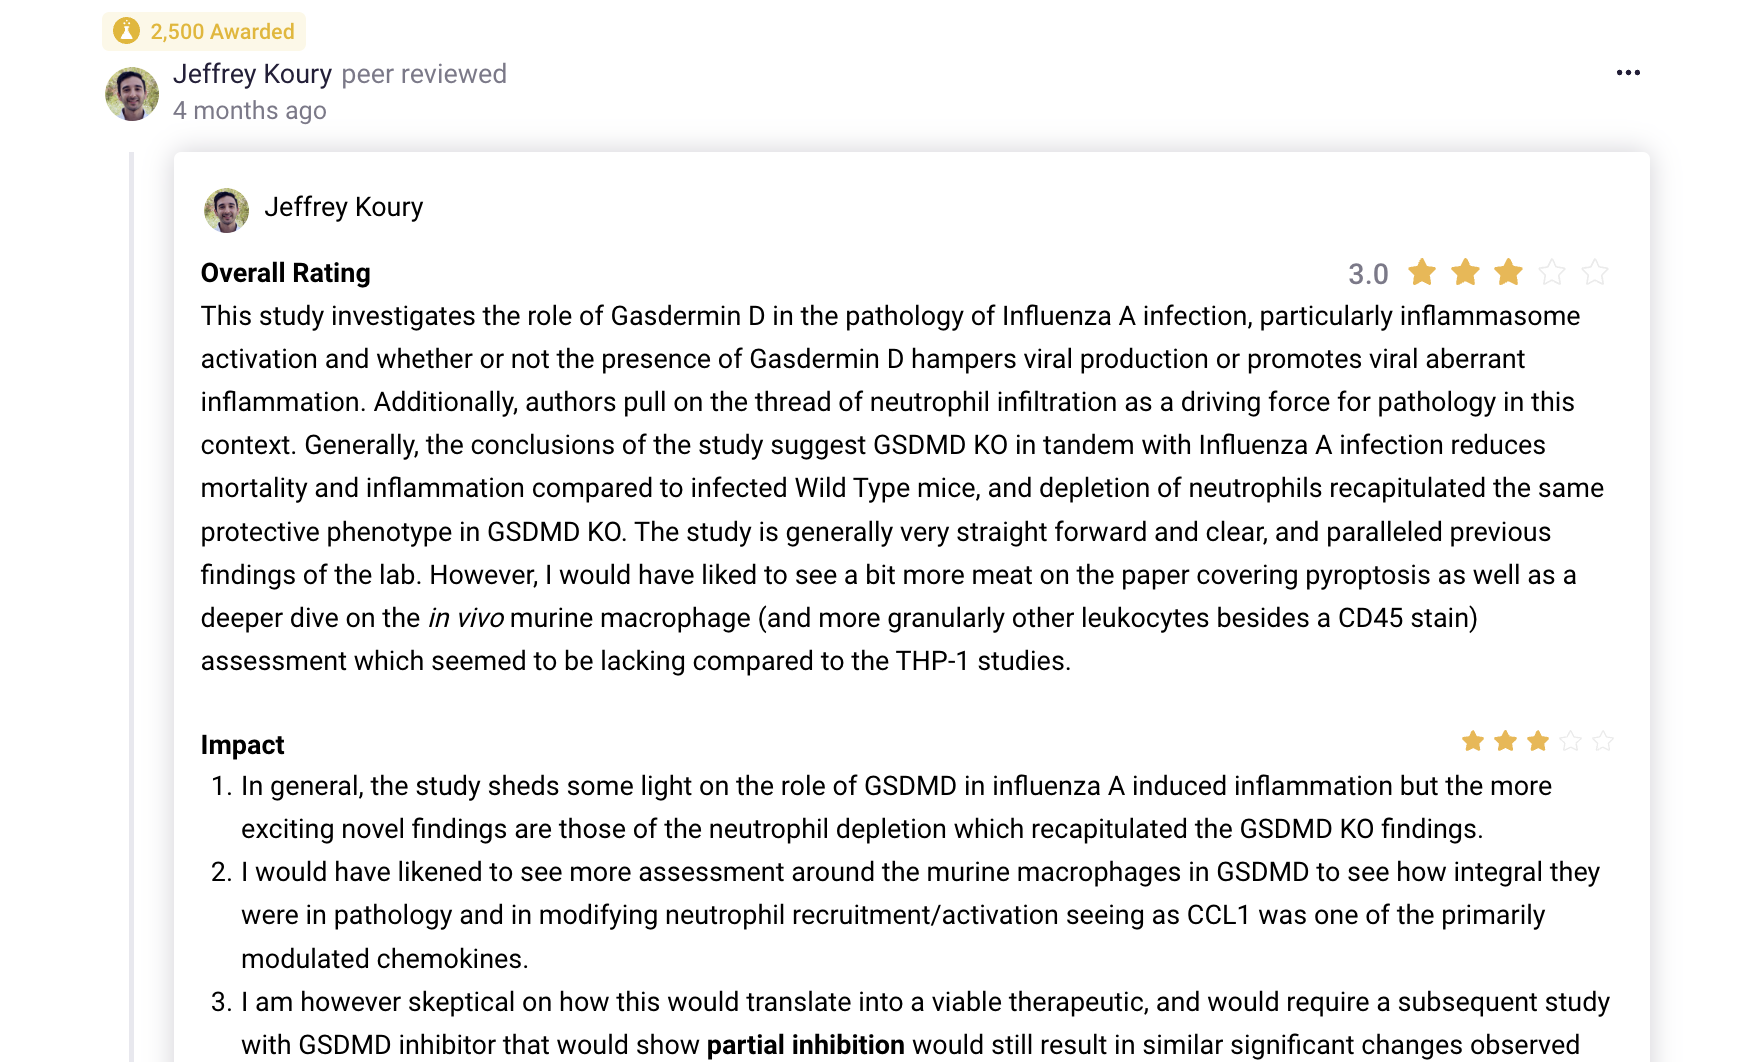 Example of a Peer Review on ResearchHub